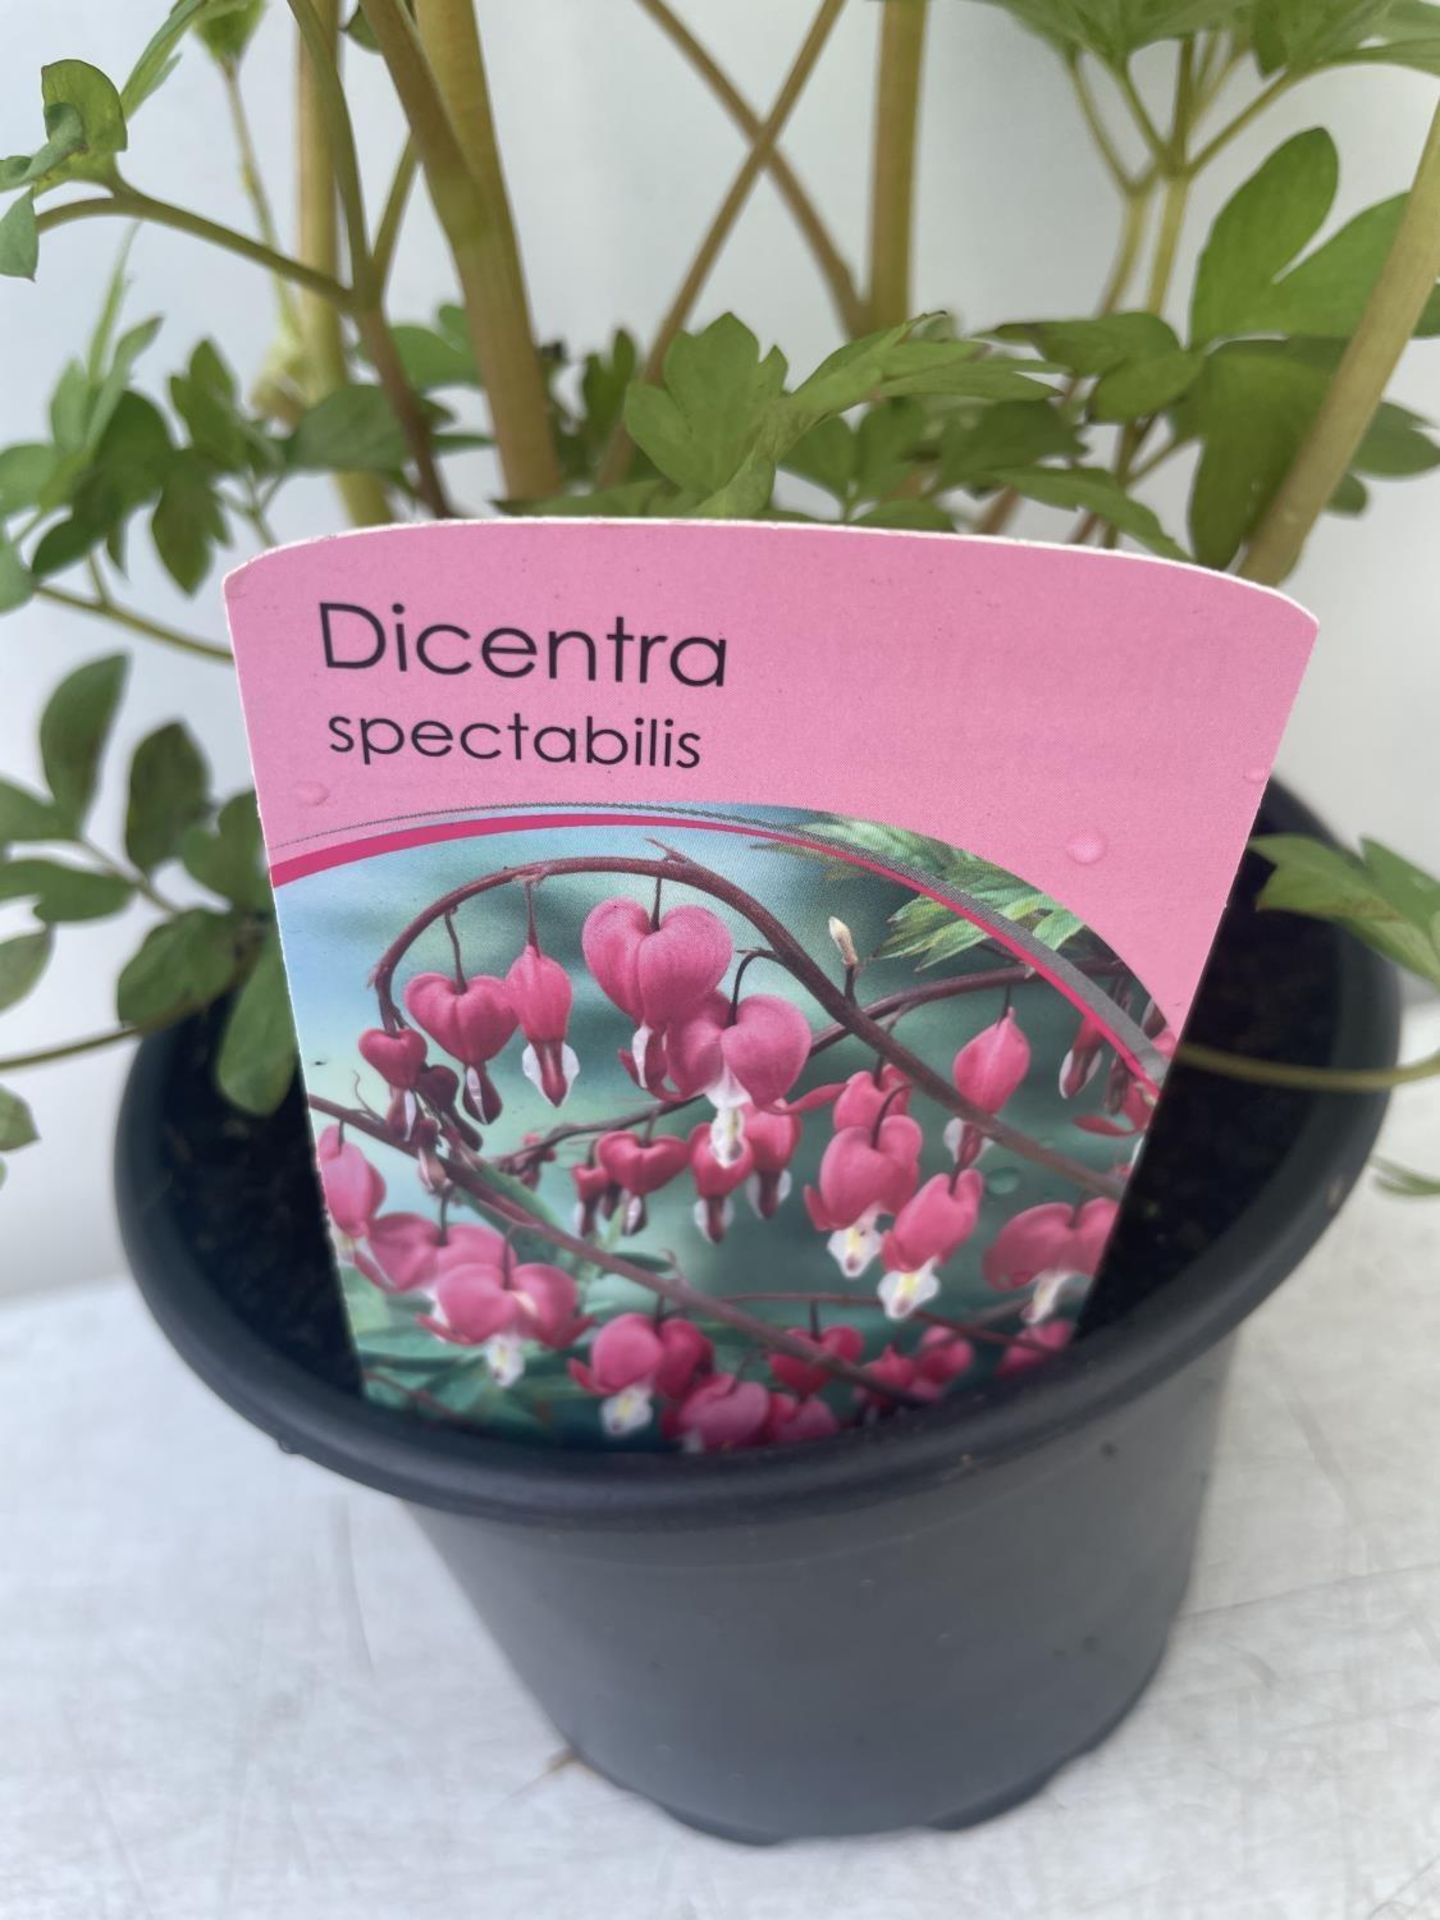 SIX DICENTRA SPECTABILIS BLEEDING HEART 50CM TALL IN 2 LTR POTS TO BE SOLD FOR THE SIX PLUS VAT - Image 7 of 9